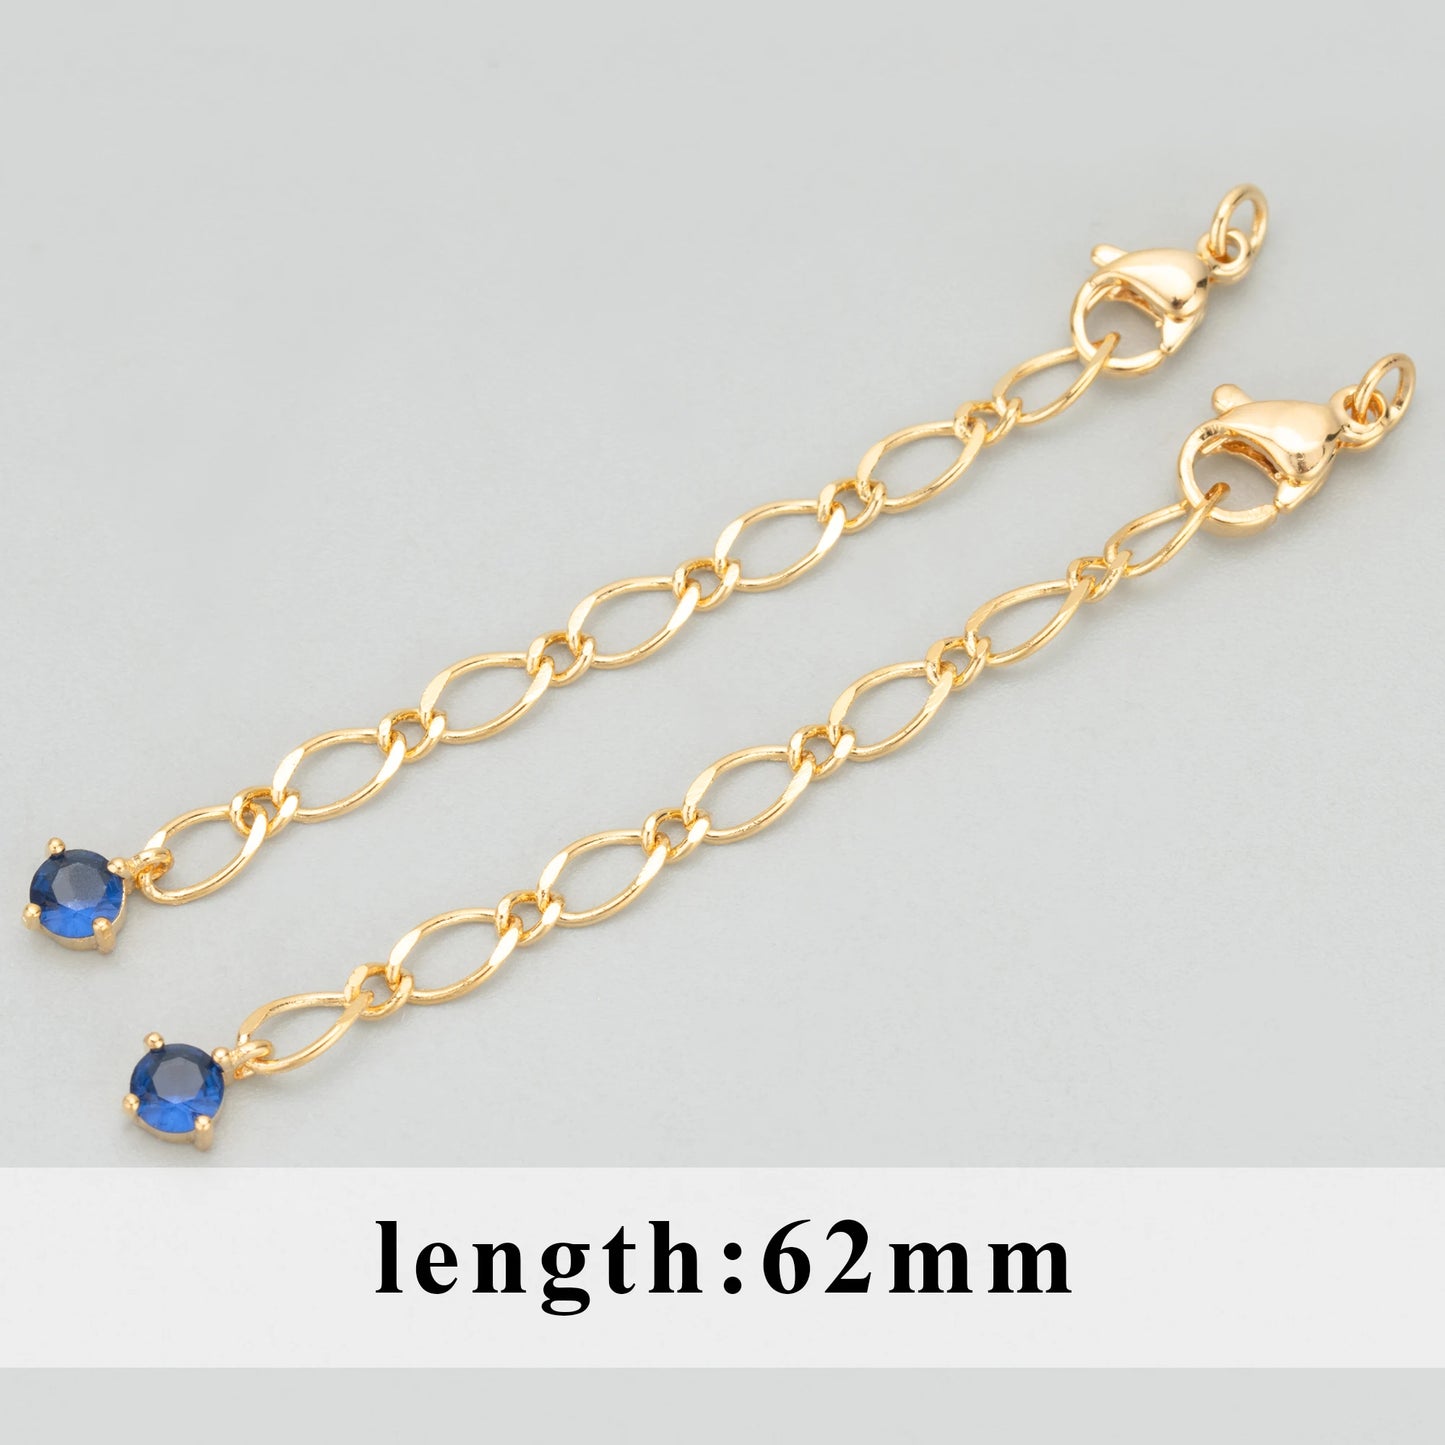 GUFEATHER MC68,jewelry accessories,18k gold rhodium plated,copper,zircon,nickel free,jewelry making,extended chain,10pcs/lot